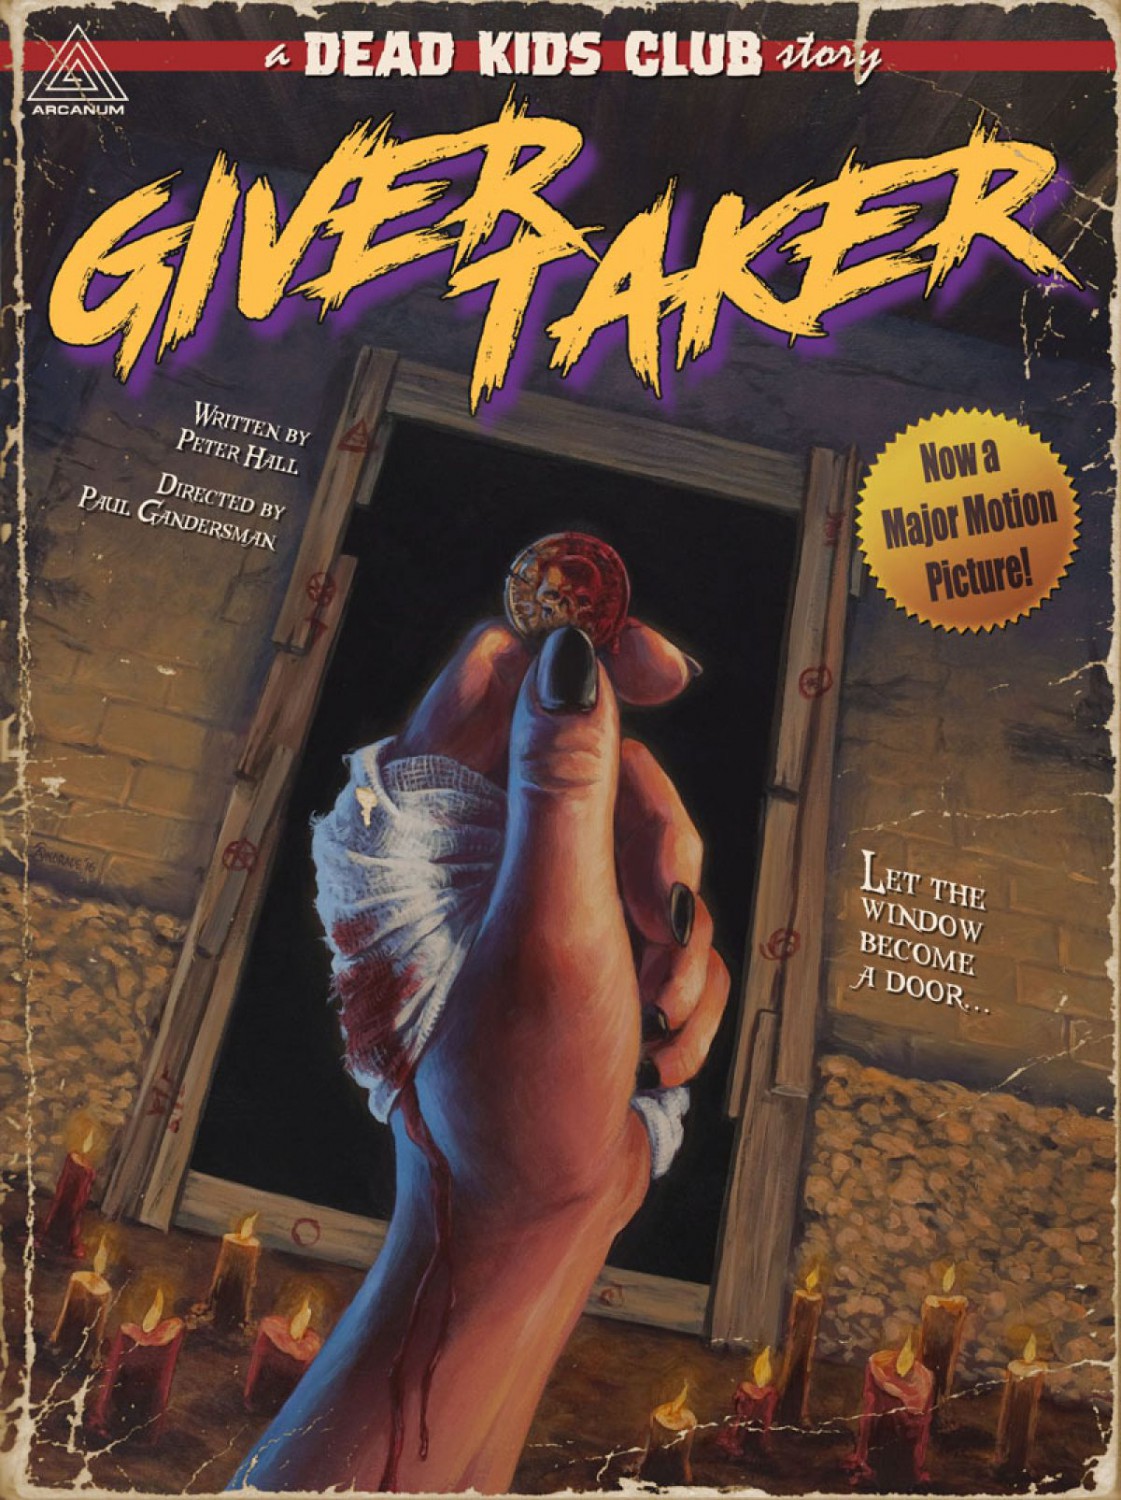 Extra Large Movie Poster Image for Givertaker